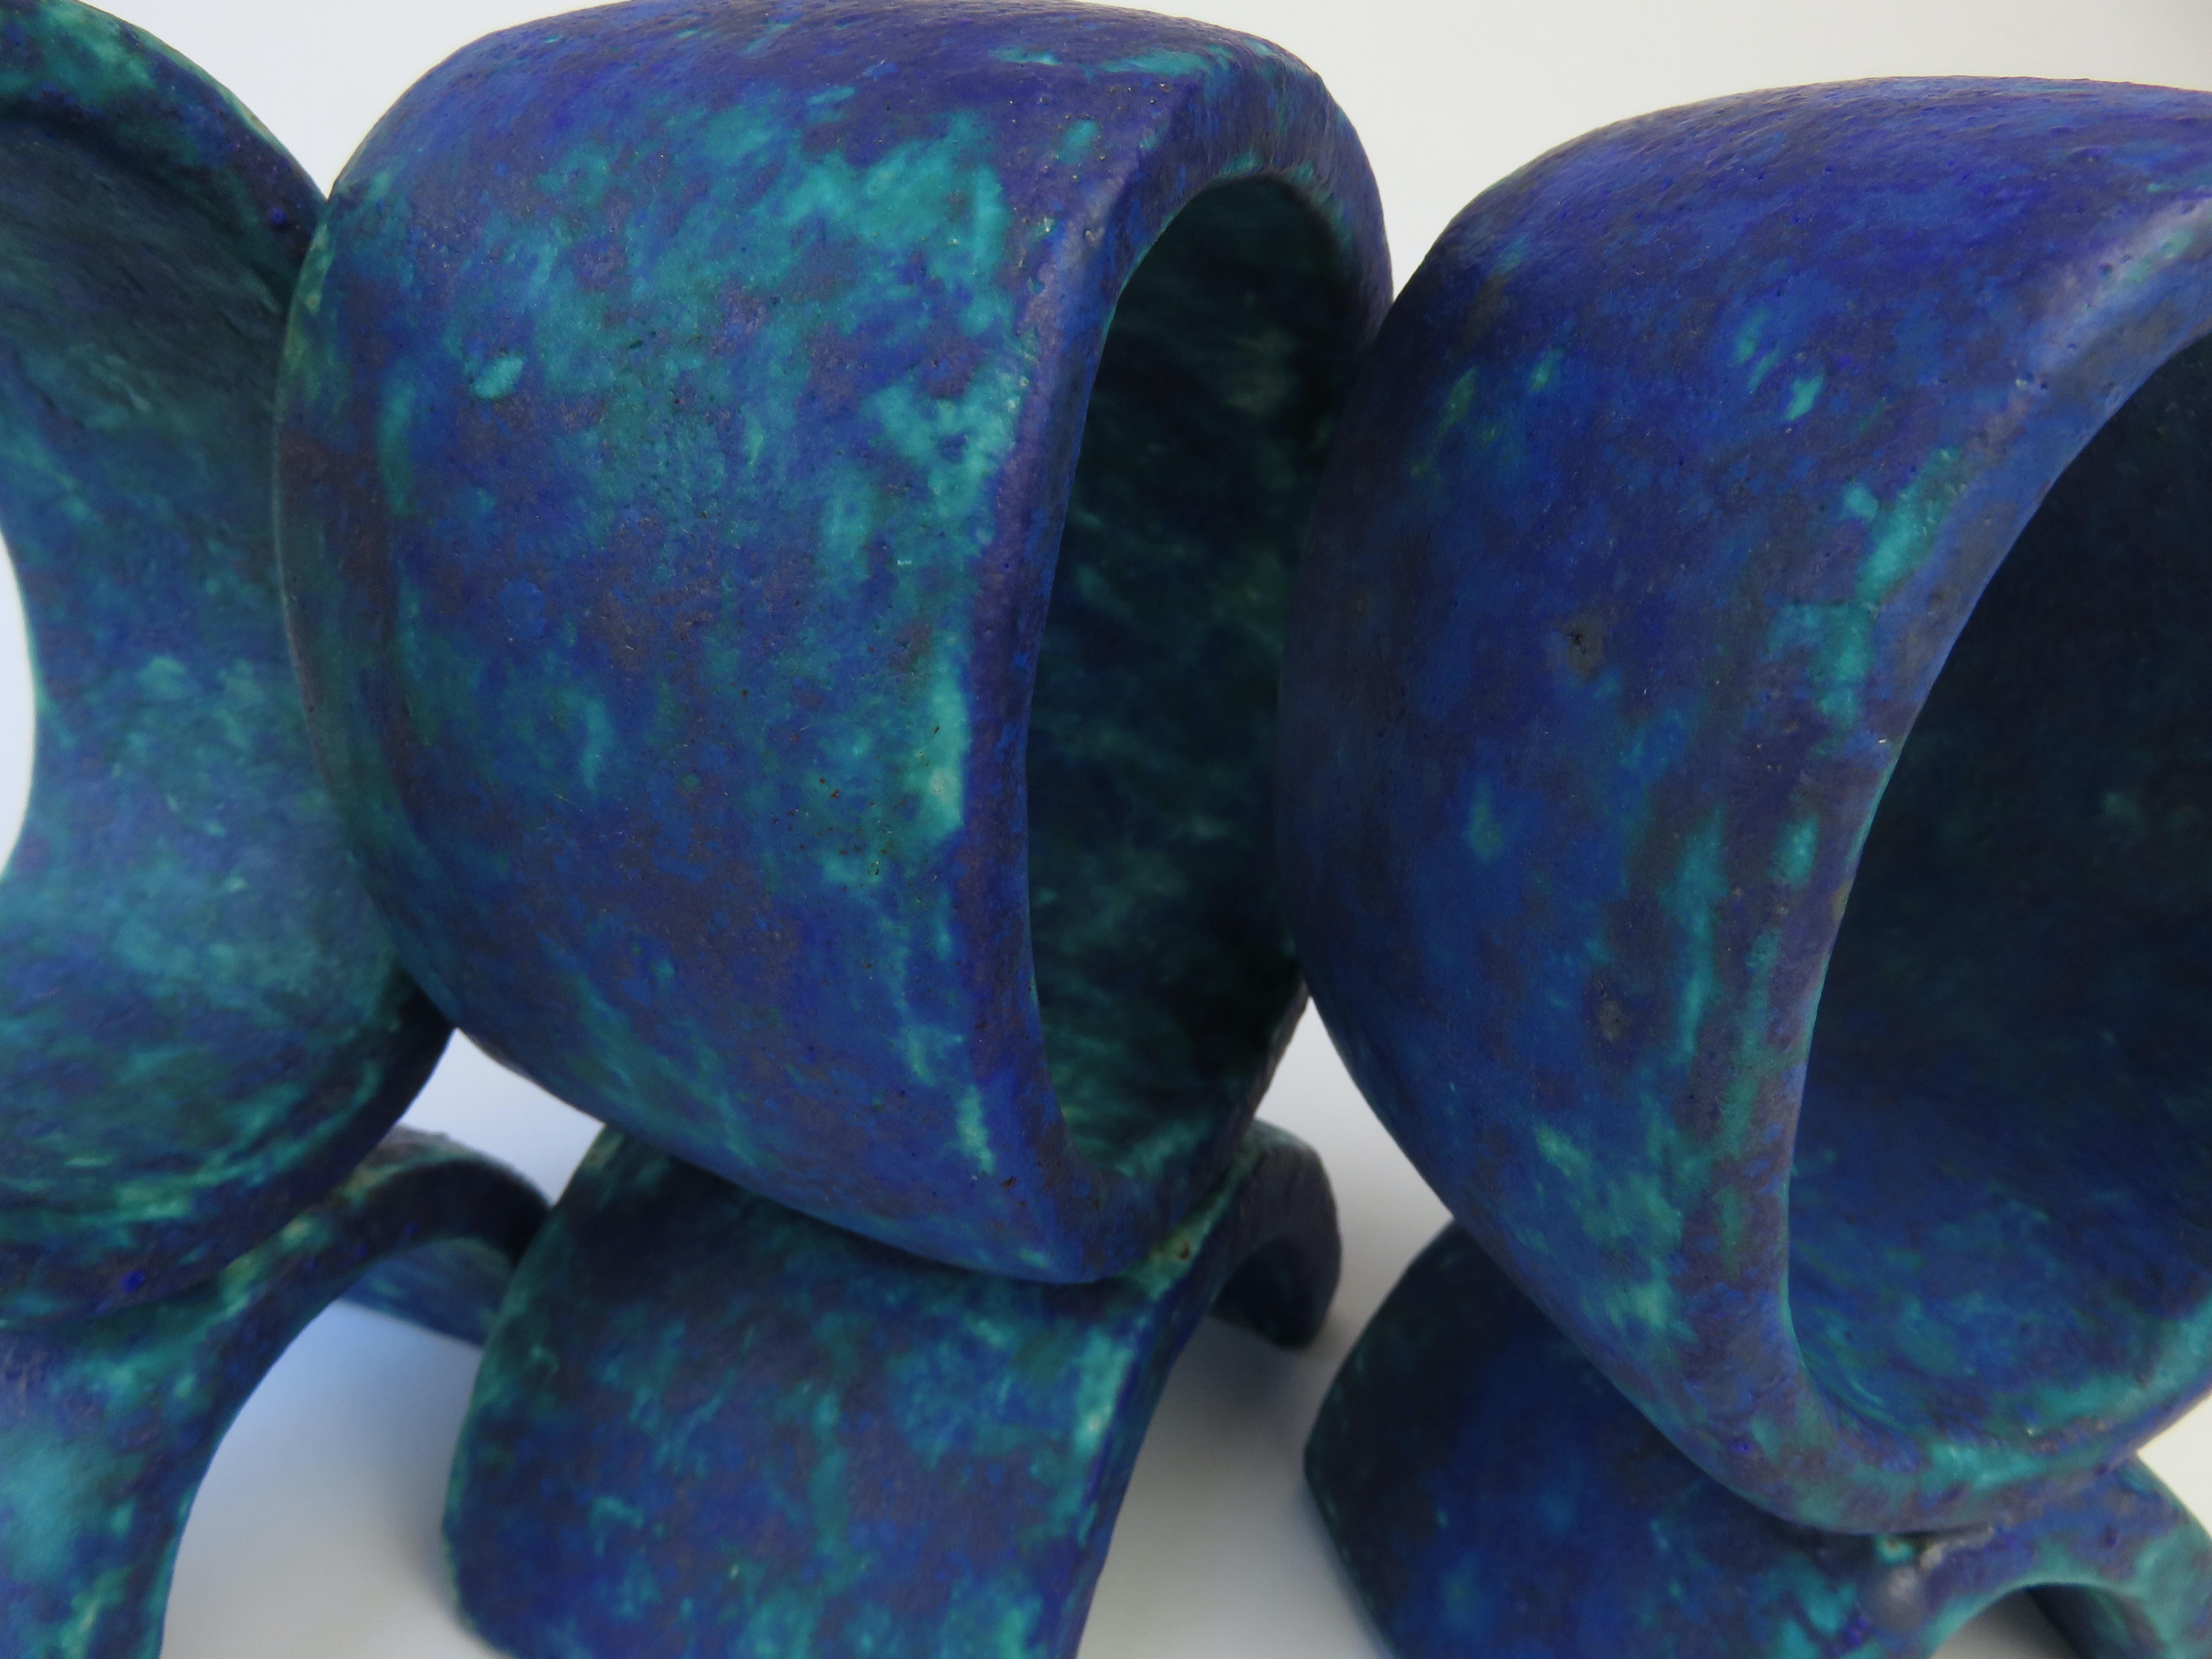 Mottled Turquoise and Deep Blue, 3 Ceramic Totems, Single Rings on Curved Legs For Sale 9